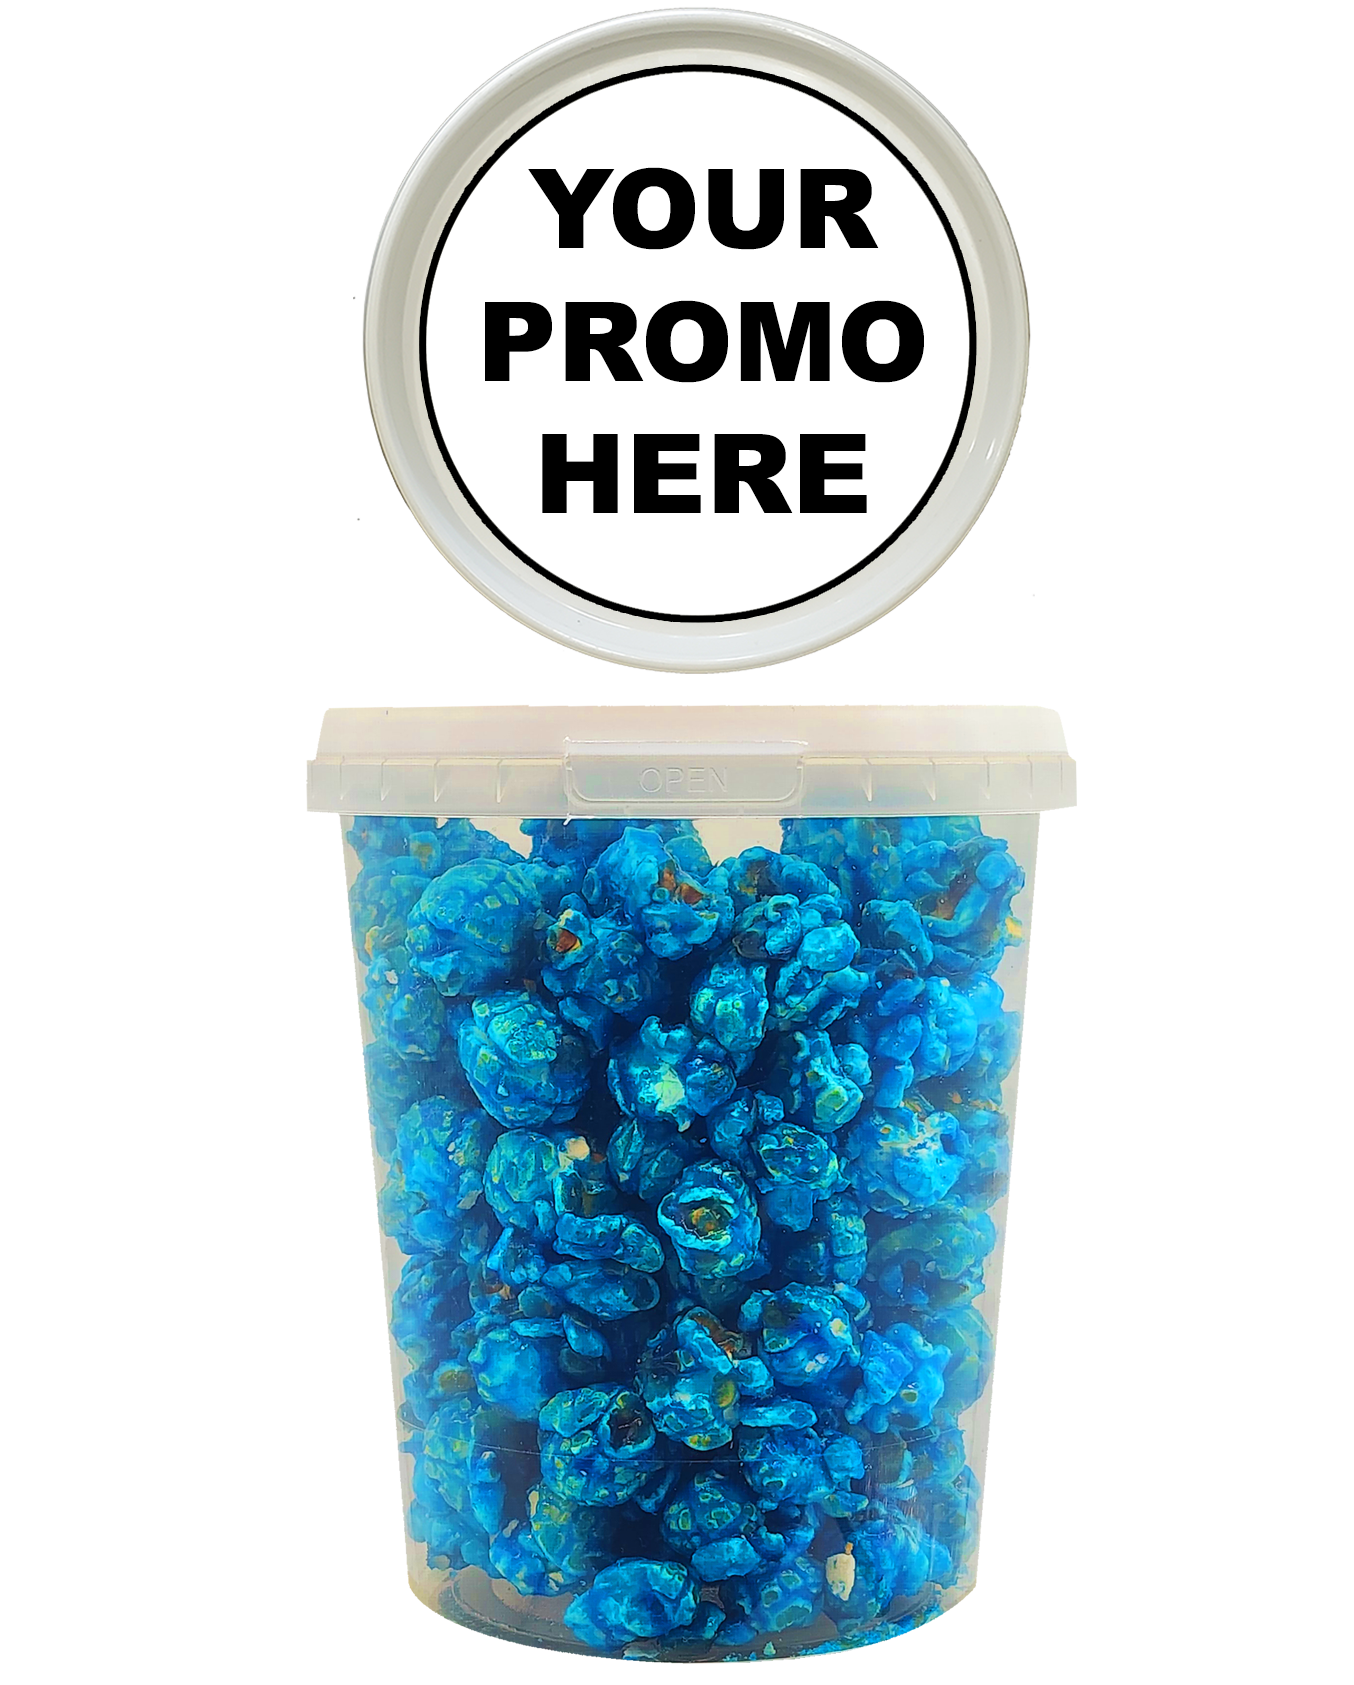 Promo Pop™ - Blue Raspberry Classic (as low as $4.99 per bucket) Case of 12 Price